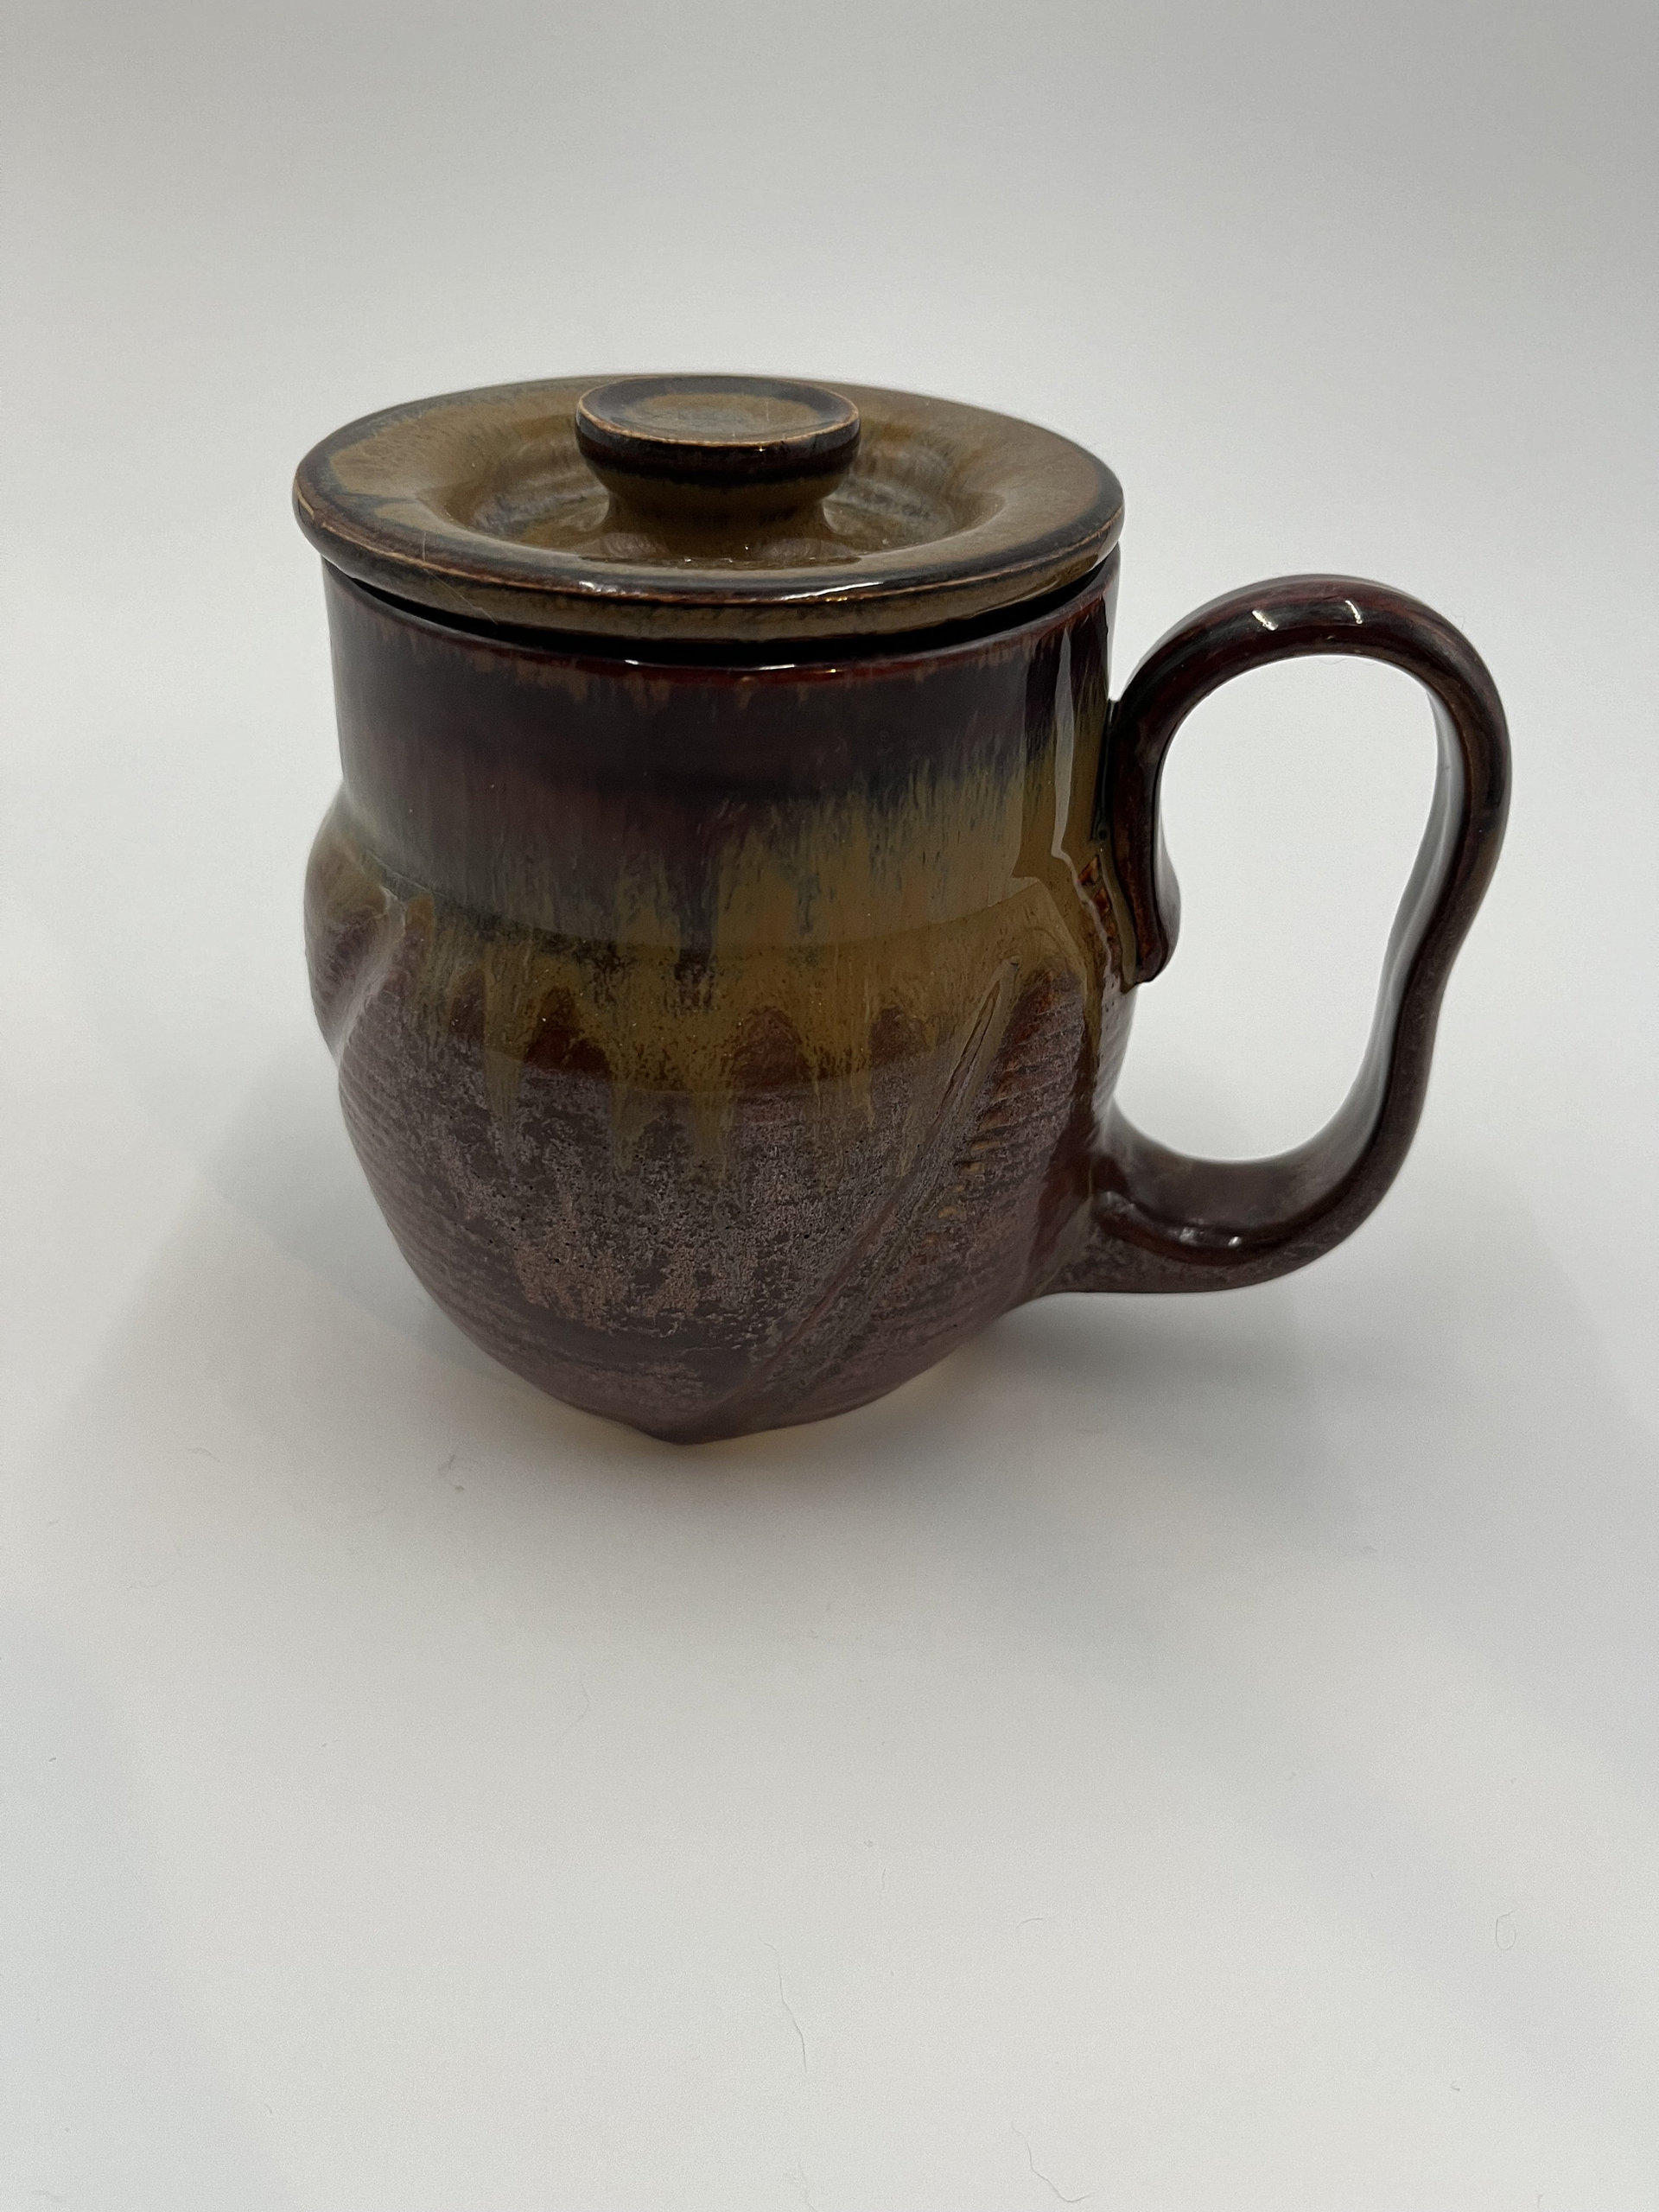 Handmade Earthy Red Carved Ceramic Mug with a lid